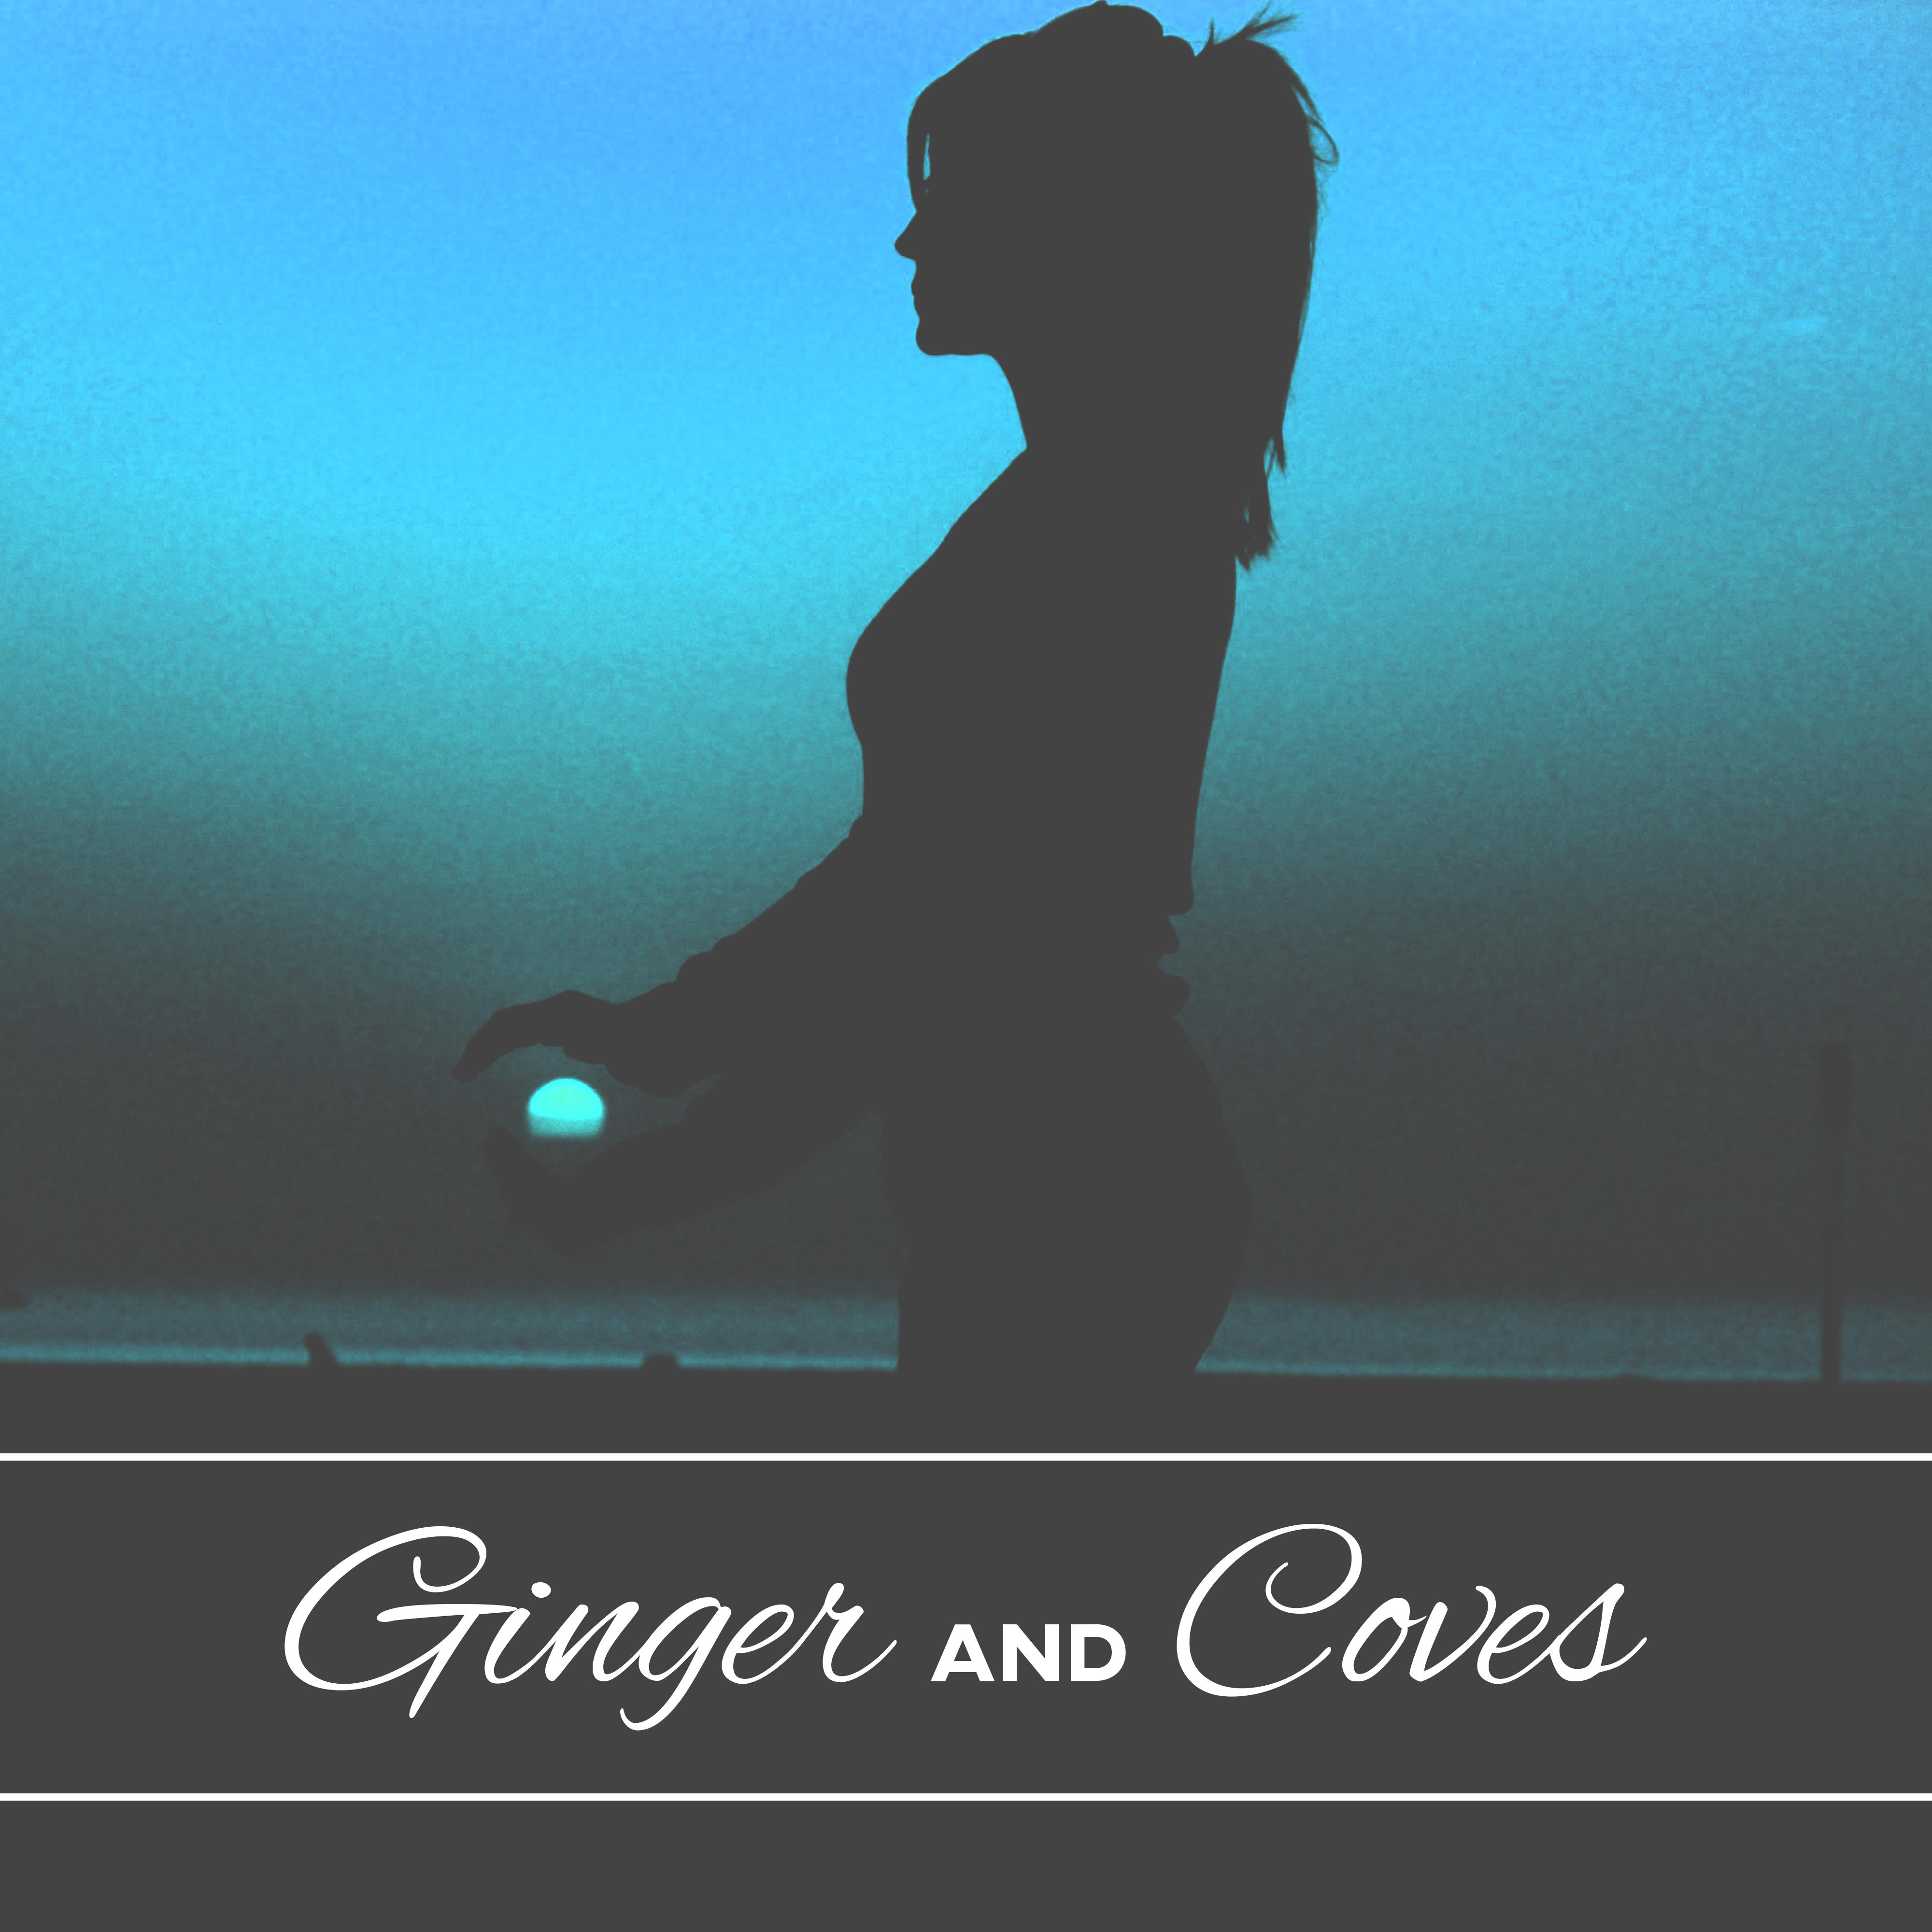 Ginger and Coves - Relaxing Smell, Health, Herbs, Jasmine Tea, Warm Blanket